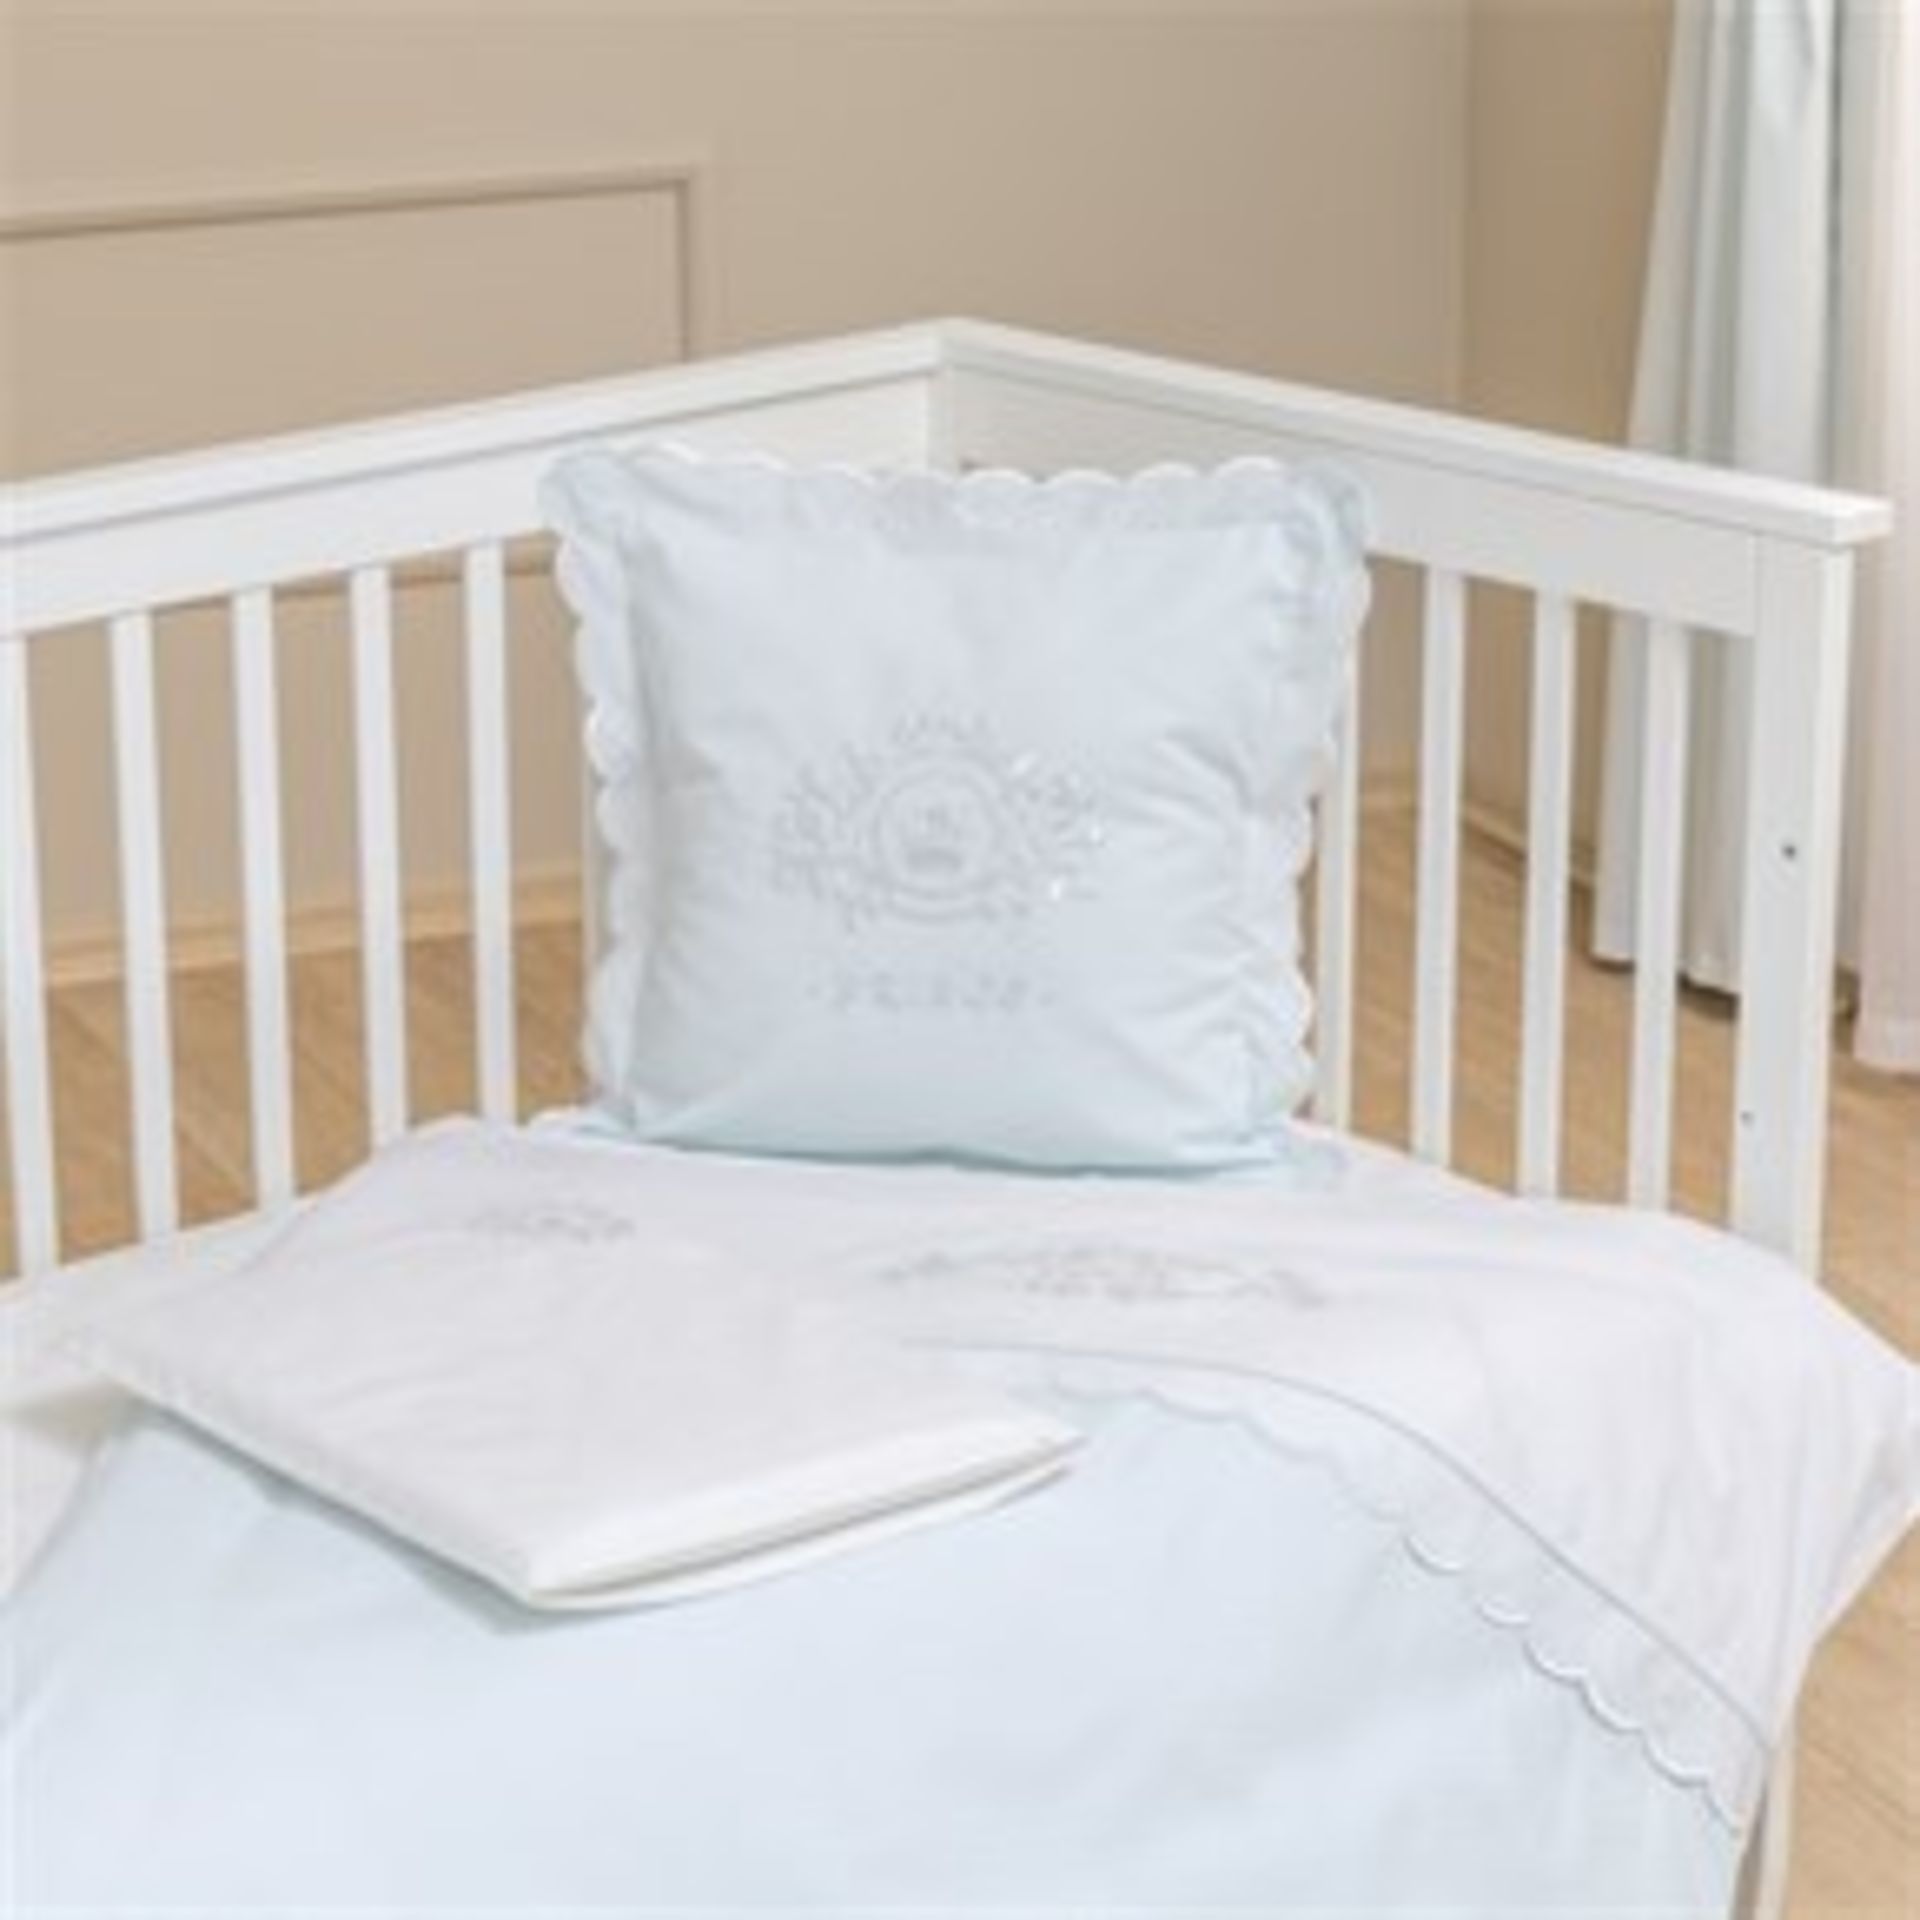 FUNNA BABY SWEET LITTLE THINGS PRINCE BEDDING SET NEW IN PACKAGING RRP £130 (Saleroom location: